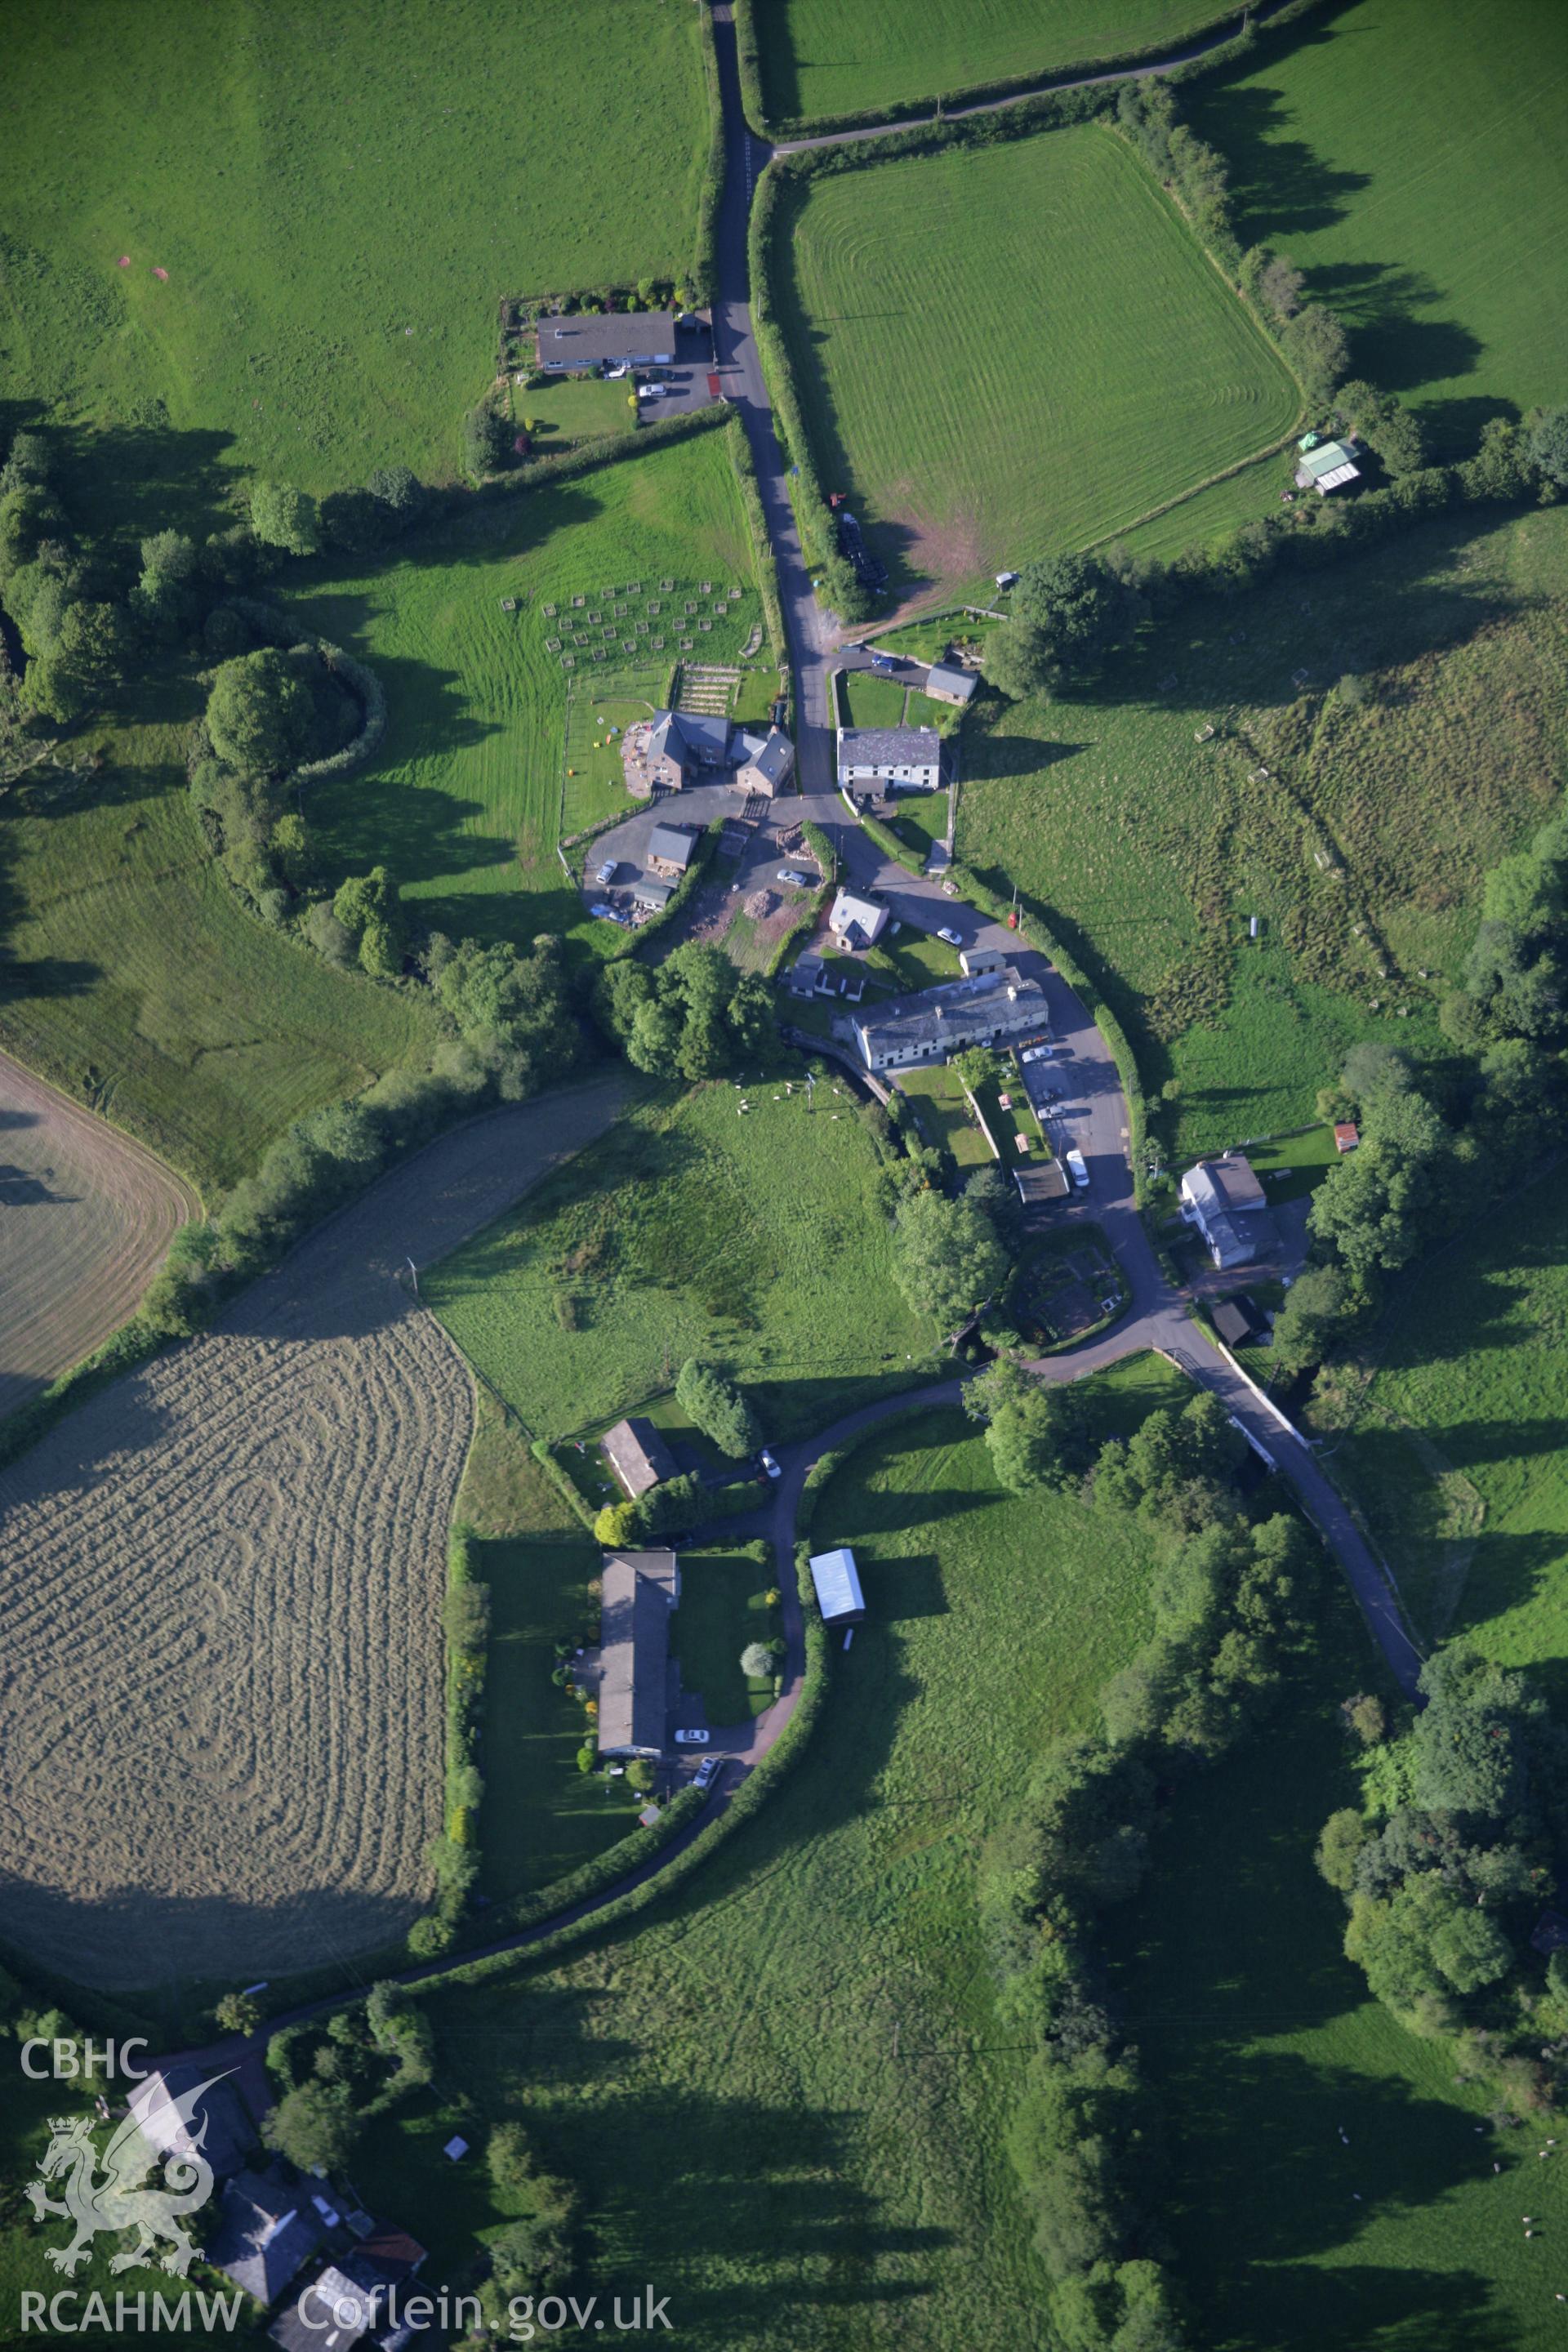 RCAHMW colour oblique aerial photograph of Pentre Bach village. Taken on 08 August 2007 by Toby Driver